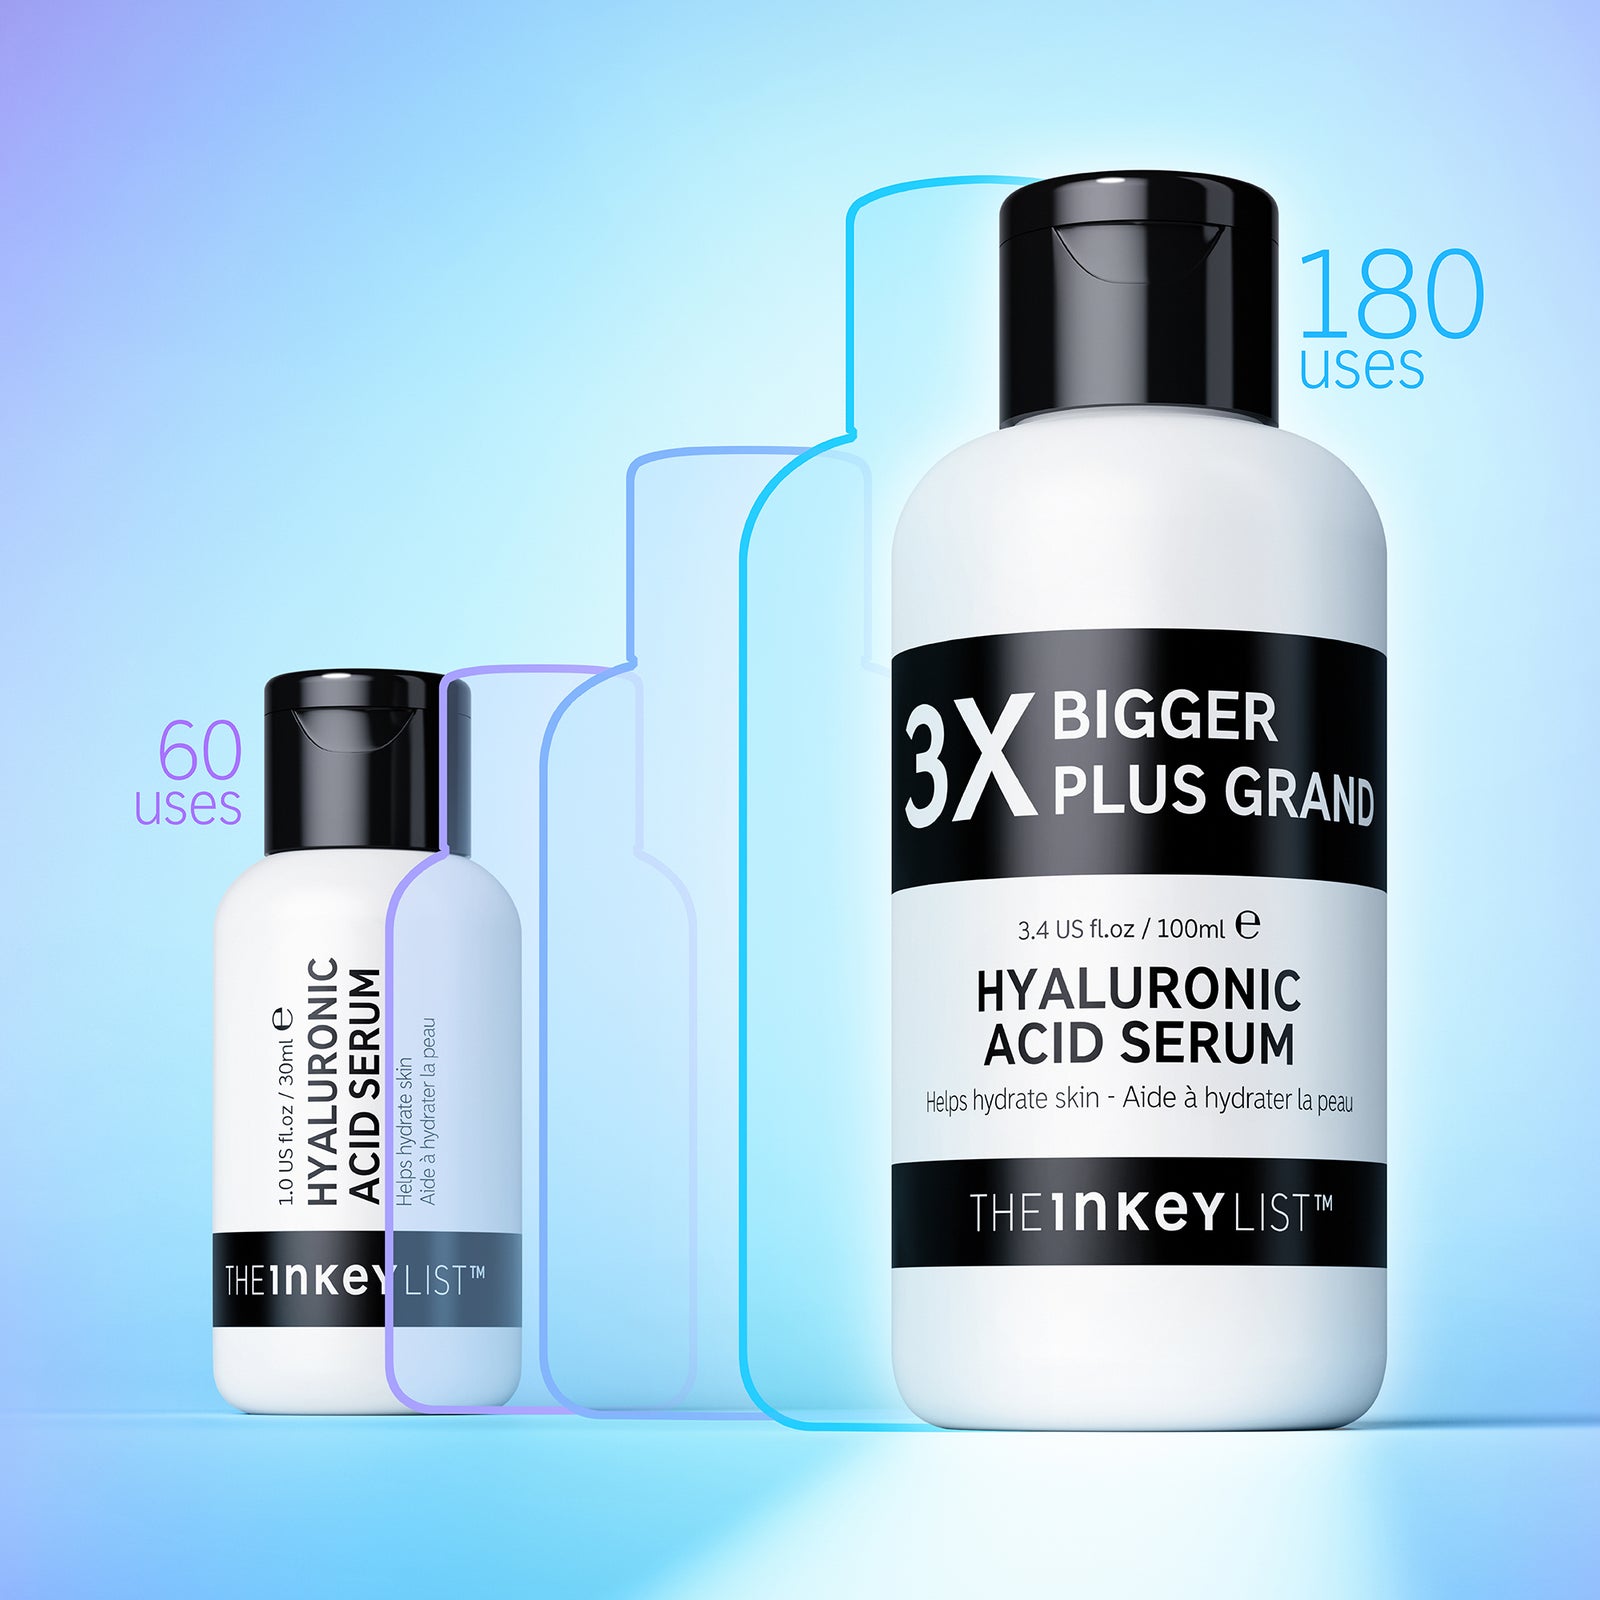 Supersized Hyaluronic Acid Serum light shot showing size comparison of 30ml and 100ml